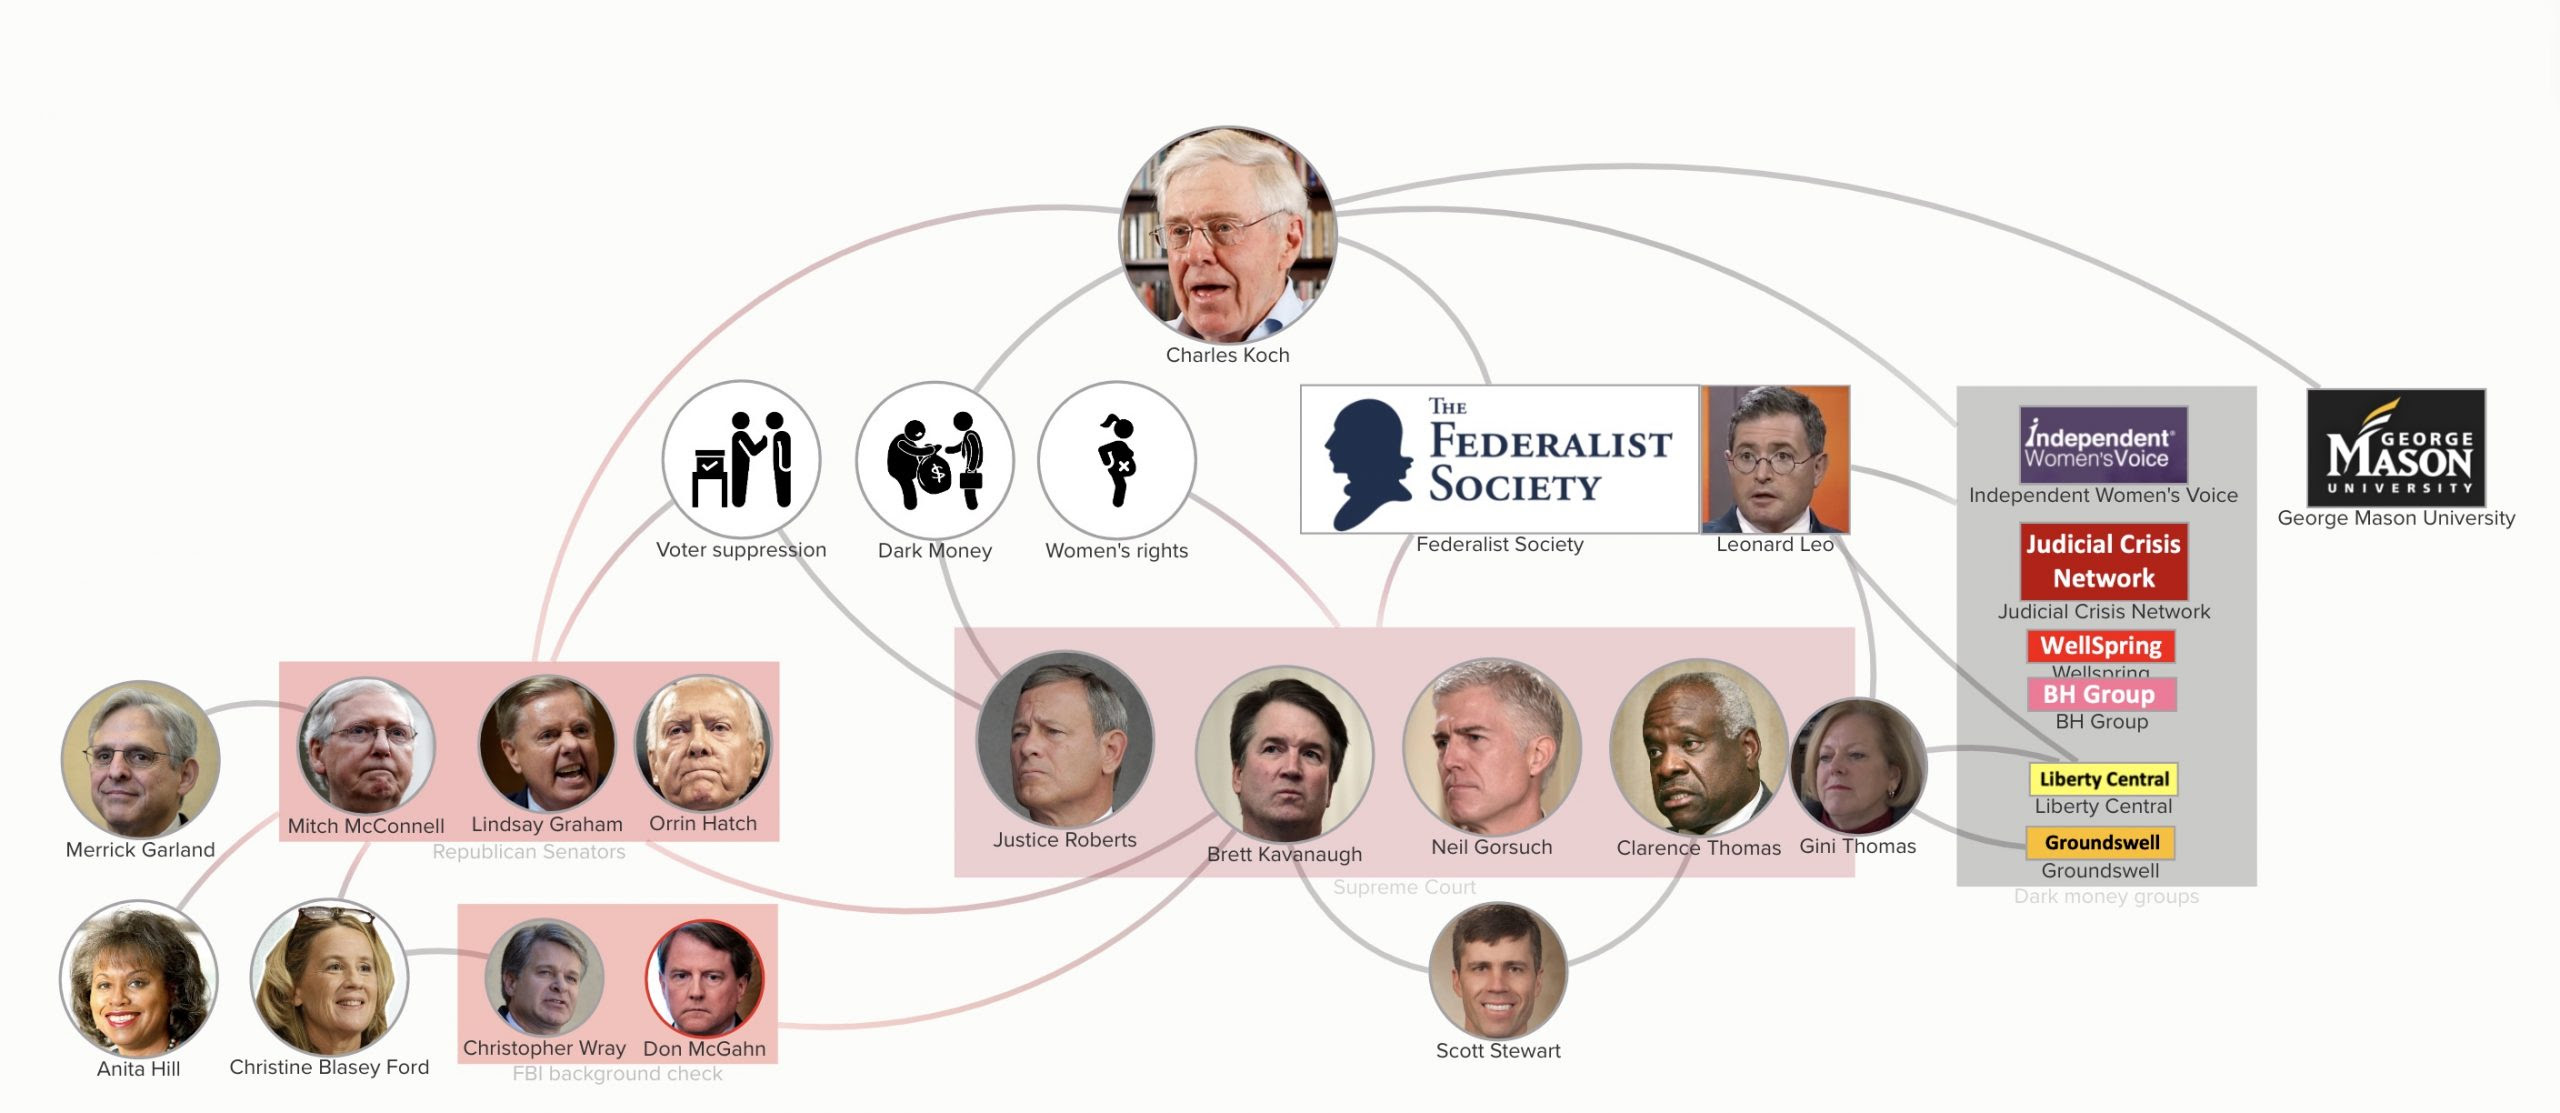 The Federalist Society has an annual budget is about $20 million. It is funded by dark money and designed to remake our judiciary on behalf of a distinct group of very wealthy anonymous funders. The Federalist Society is funded by massive, secret contributions from corporate right-wing groups that have big agendas before the courts.  It understands the fundamental power of the federal judiciary to rig the system in favor of its donor interests. Nearly 90% of Trump’s appellate judges, and both his Supreme Court justices, are members of the so-called Federalist Society. Kavanaugh, Gorsuch, Alito, Thomas are members.